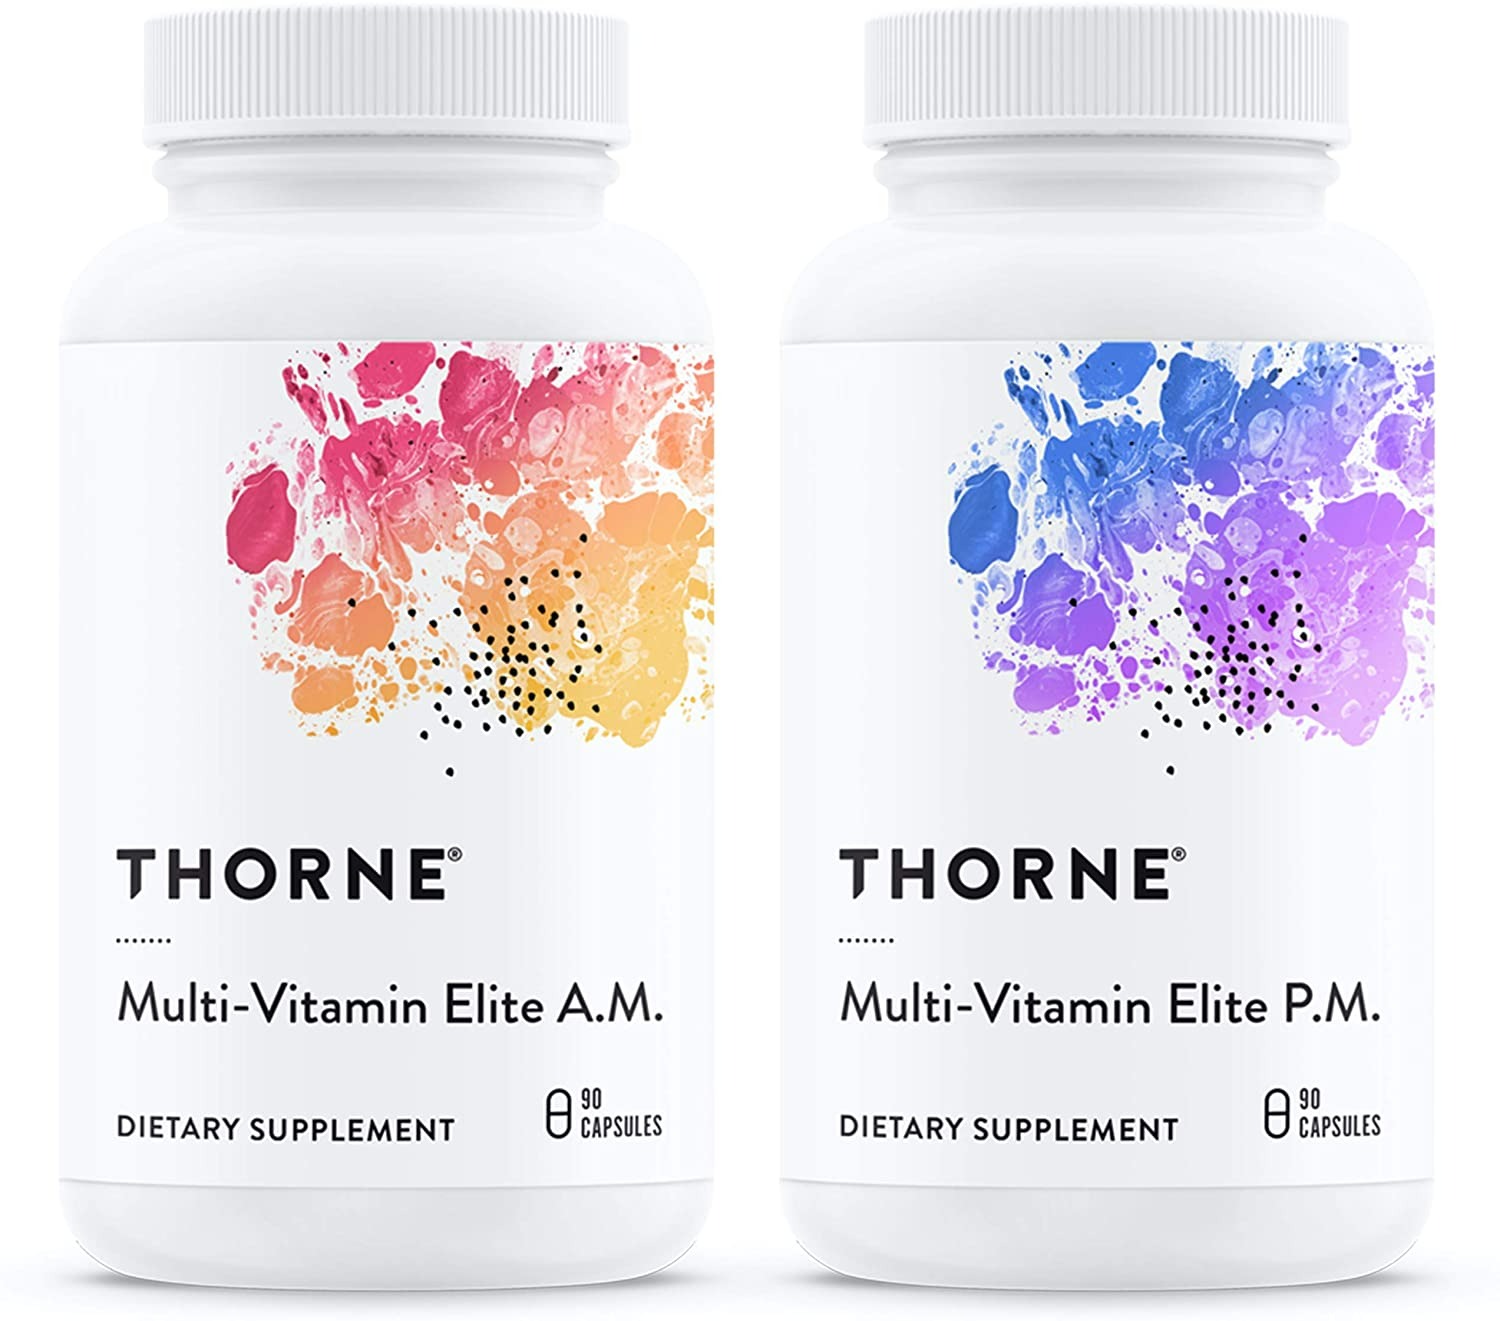 Thorne Research - Multi-Vitamin Elite A.M. and P.M. - 180 Tablet